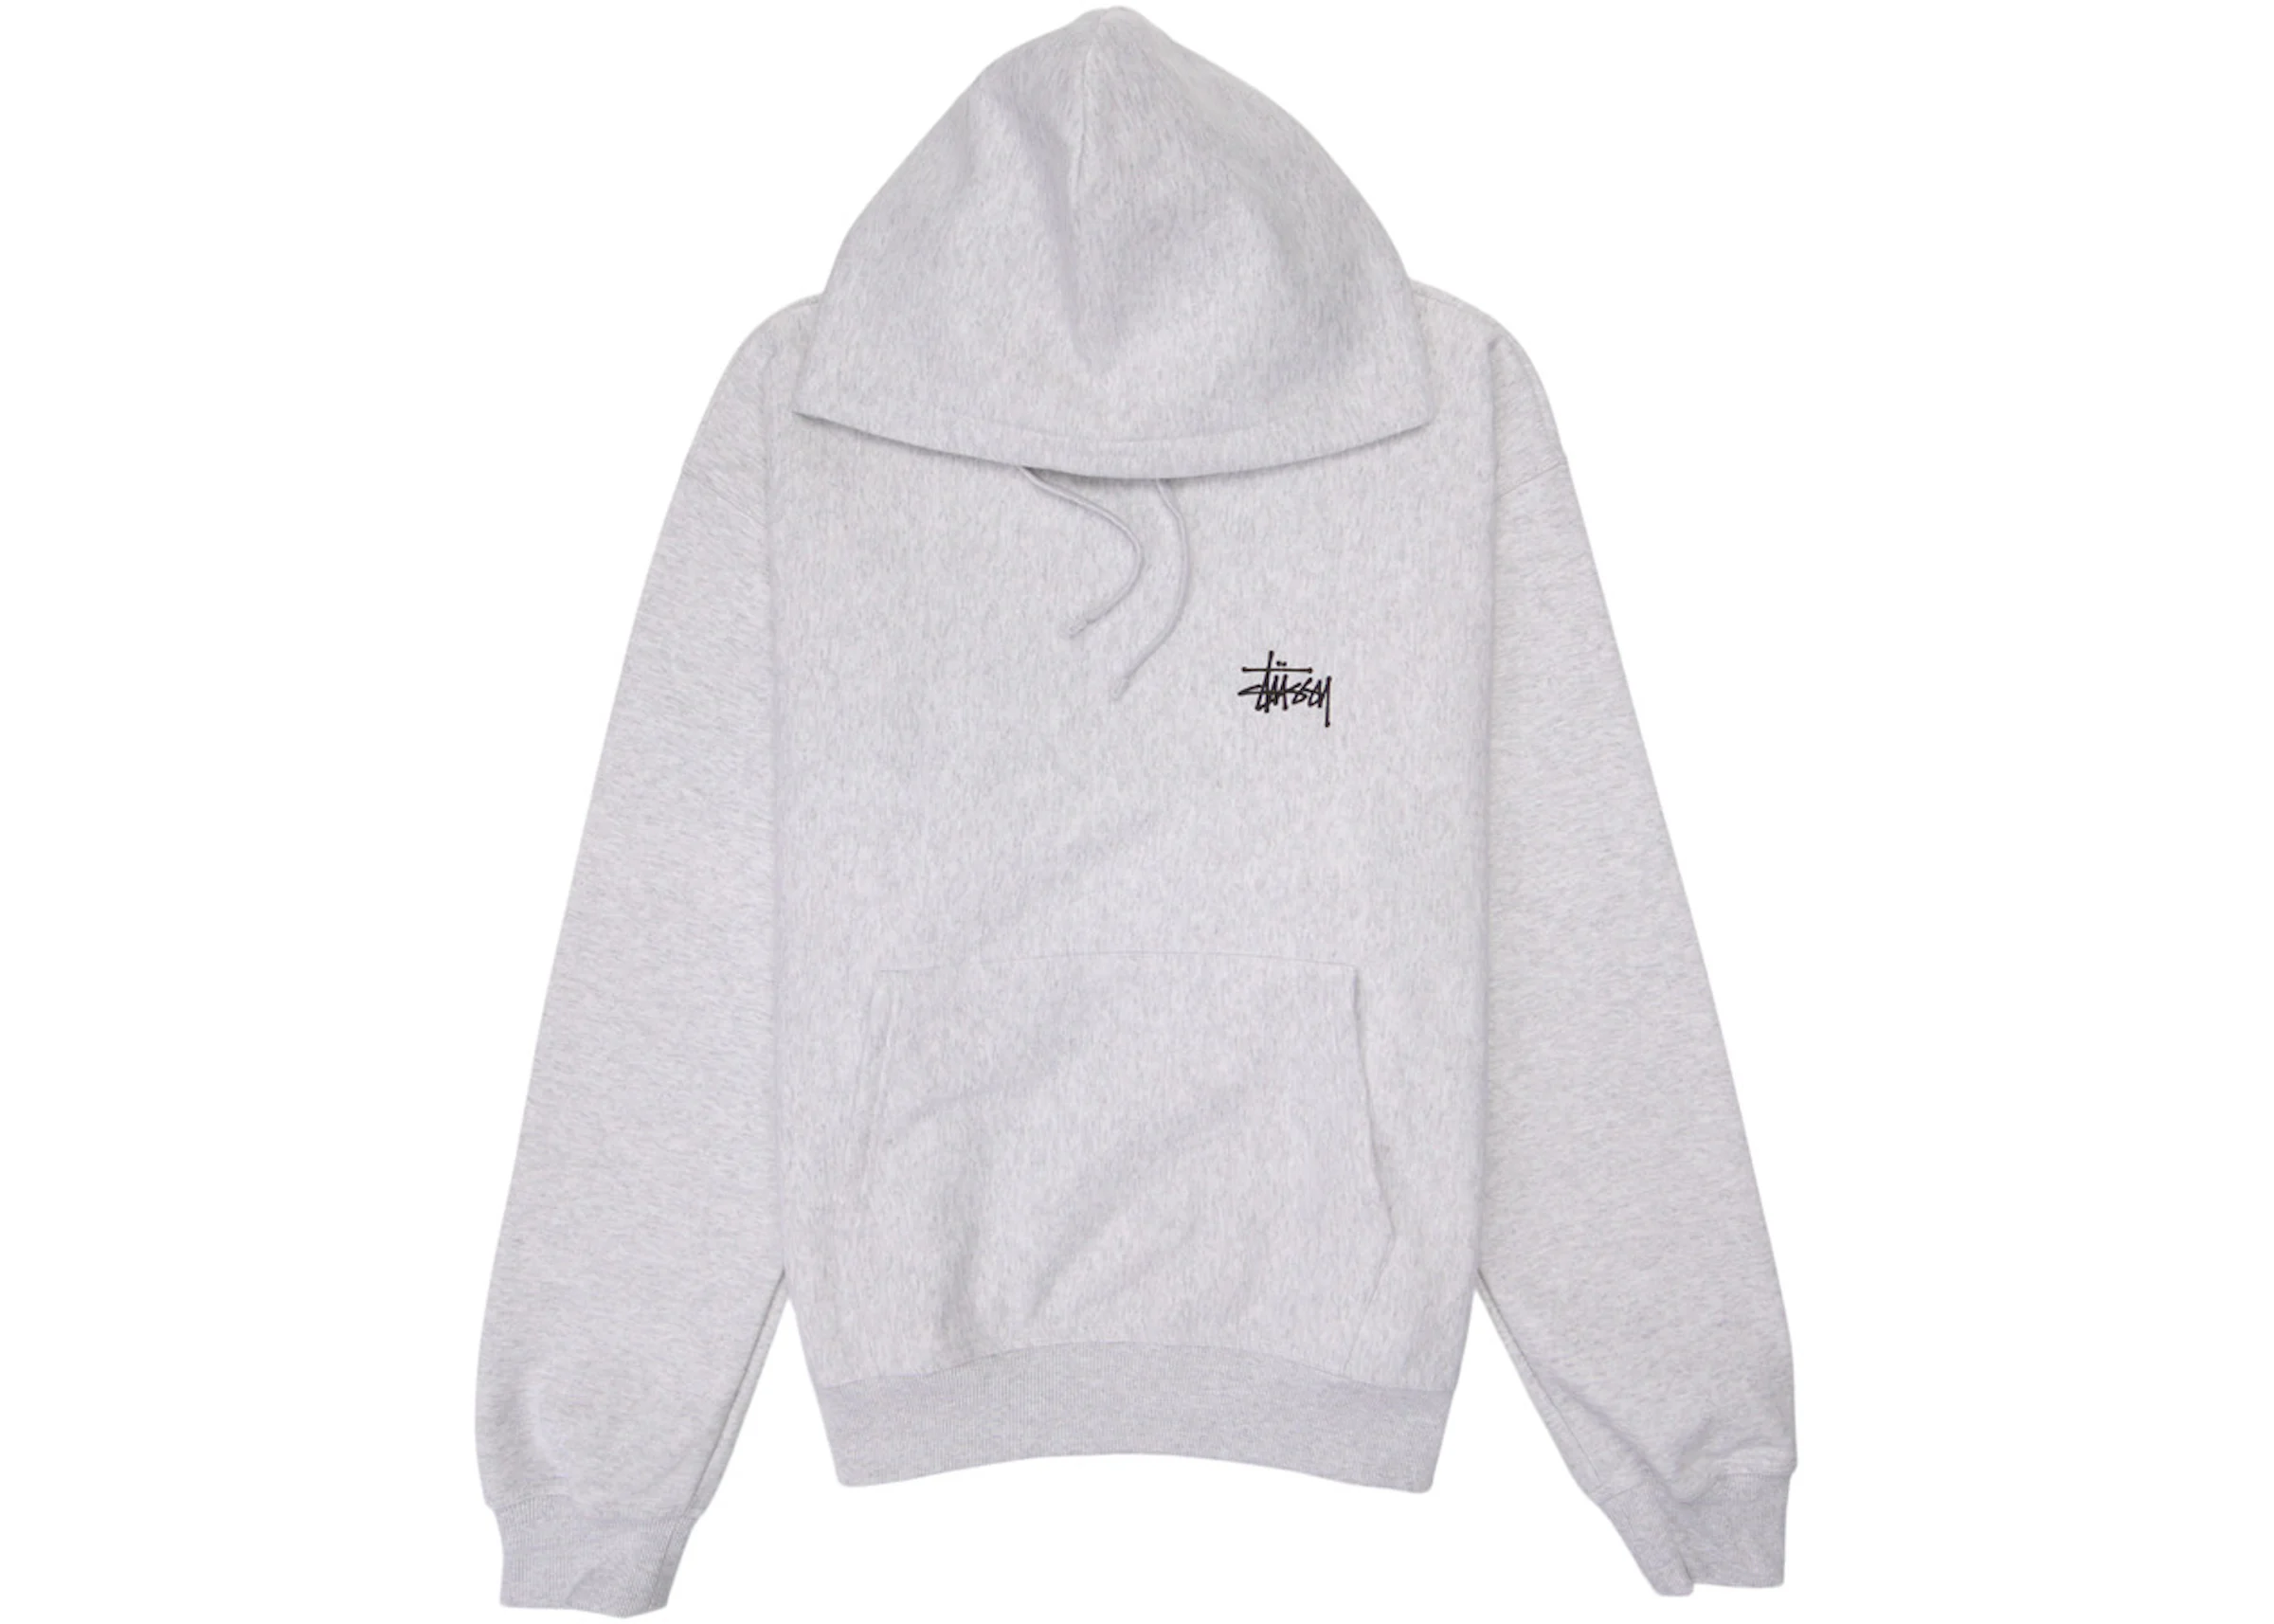 Stussy Hoodies: A Deep Dive into Their Cultural Influence